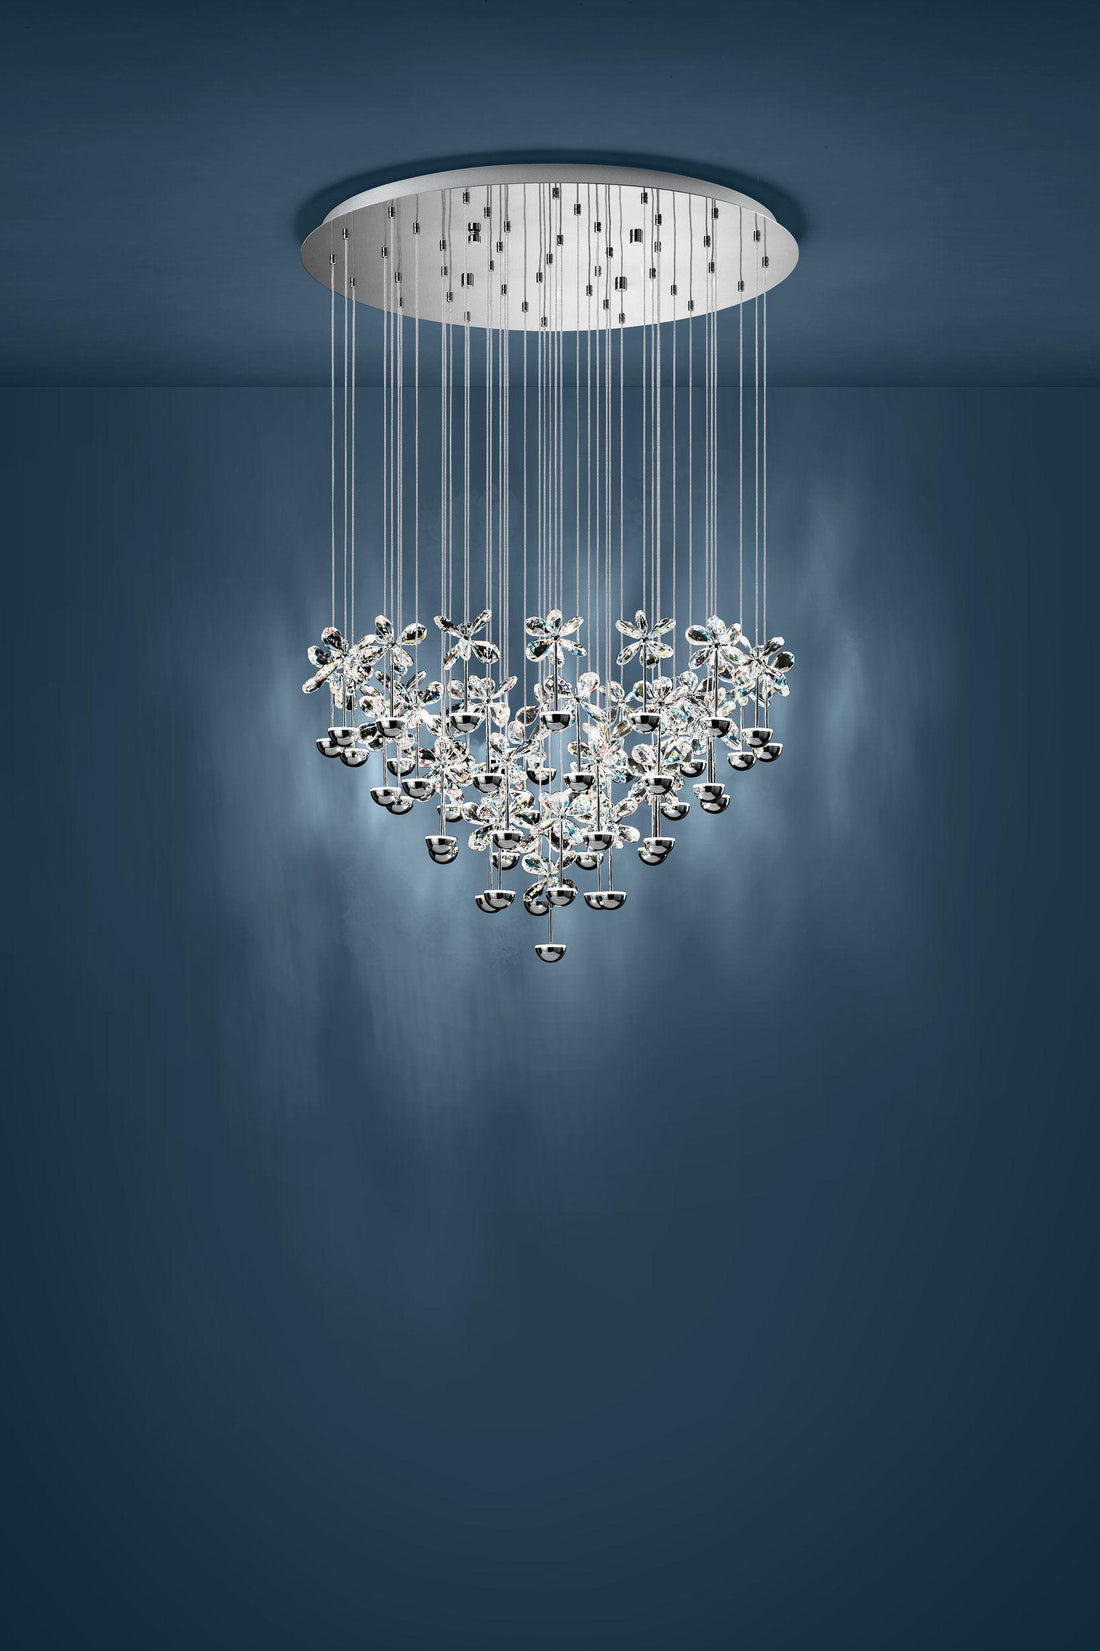 PIANOPOLI Round Chandelier Light 780 by The Light Library